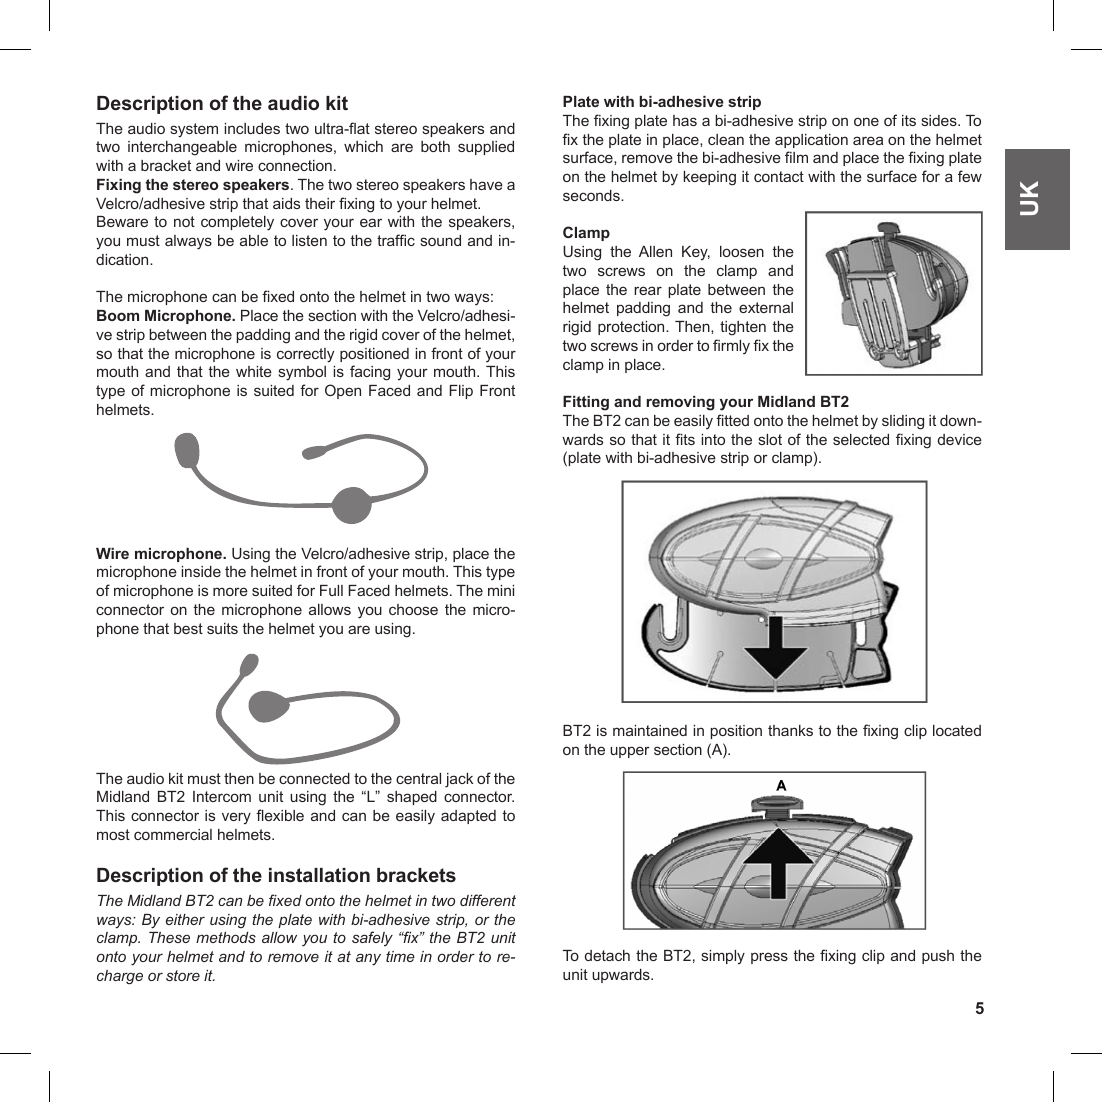 5UKDescription of the audio kitThe audio system includes two ultra-at stereo speakers and two  interchangeable  microphones,  which  are  both  supplied with a bracket and wire connection.Fixing the stereo speakers. The two stereo speakers have a Velcro/adhesive strip that aids their xing to your helmet.Beware to not completely cover your ear with the speakers, you must always be able to listen to the trafc sound and in-dication.The microphone can be xed onto the helmet in two ways:Boom Microphone. Place the section with the Velcro/adhesi-ve strip between the padding and the rigid cover of the helmet, so that the microphone is correctly positioned in front of your mouth and that the white symbol is facing your mouth. This type of microphone is suited for Open Faced and Flip Front helmets.Wire microphone. Using the Velcro/adhesive strip, place the microphone inside the helmet in front of your mouth. This type of microphone is more suited for Full Faced helmets. The mini connector  on  the  microphone  allows  you  choose  the  micro-phone that best suits the helmet you are using.The audio kit must then be connected to the central jack of the Midland  BT2  Intercom  unit  using  the  “L”  shaped  connector. This connector is very exible and can be easily adapted to most commercial helmets.Description of the installation bracketsThe Midland BT2 can be xed onto the helmet in two different ways: By either using the plate with bi-adhesive strip, or the clamp. These methods allow you to safely “x” the BT2 unit onto your helmet and to remove it at any time in order to re-charge or store it.Plate with bi-adhesive stripThe xing plate has a bi-adhesive strip on one of its sides. To x the plate in place, clean the application area on the helmet surface, remove the bi-adhesive lm and place the xing plate on the helmet by keeping it contact with the surface for a few seconds.ClampUsing  the  Allen  Key,  loosen  the two  screws  on  the  clamp  and place  the  rear  plate  between  the helmet  padding  and  the  external rigid protection. Then, tighten the two screws in order to rmly x the clamp in place.Fitting and removing your Midland BT2The BT2 can be easily tted onto the helmet by sliding it down-wards so that it ts into the slot of the selected xing device (plate with bi-adhesive strip or clamp). BT2 is maintained in position thanks to the xing clip located on the upper section (A). To detach the BT2, simply press the xing clip and push the unit upwards.